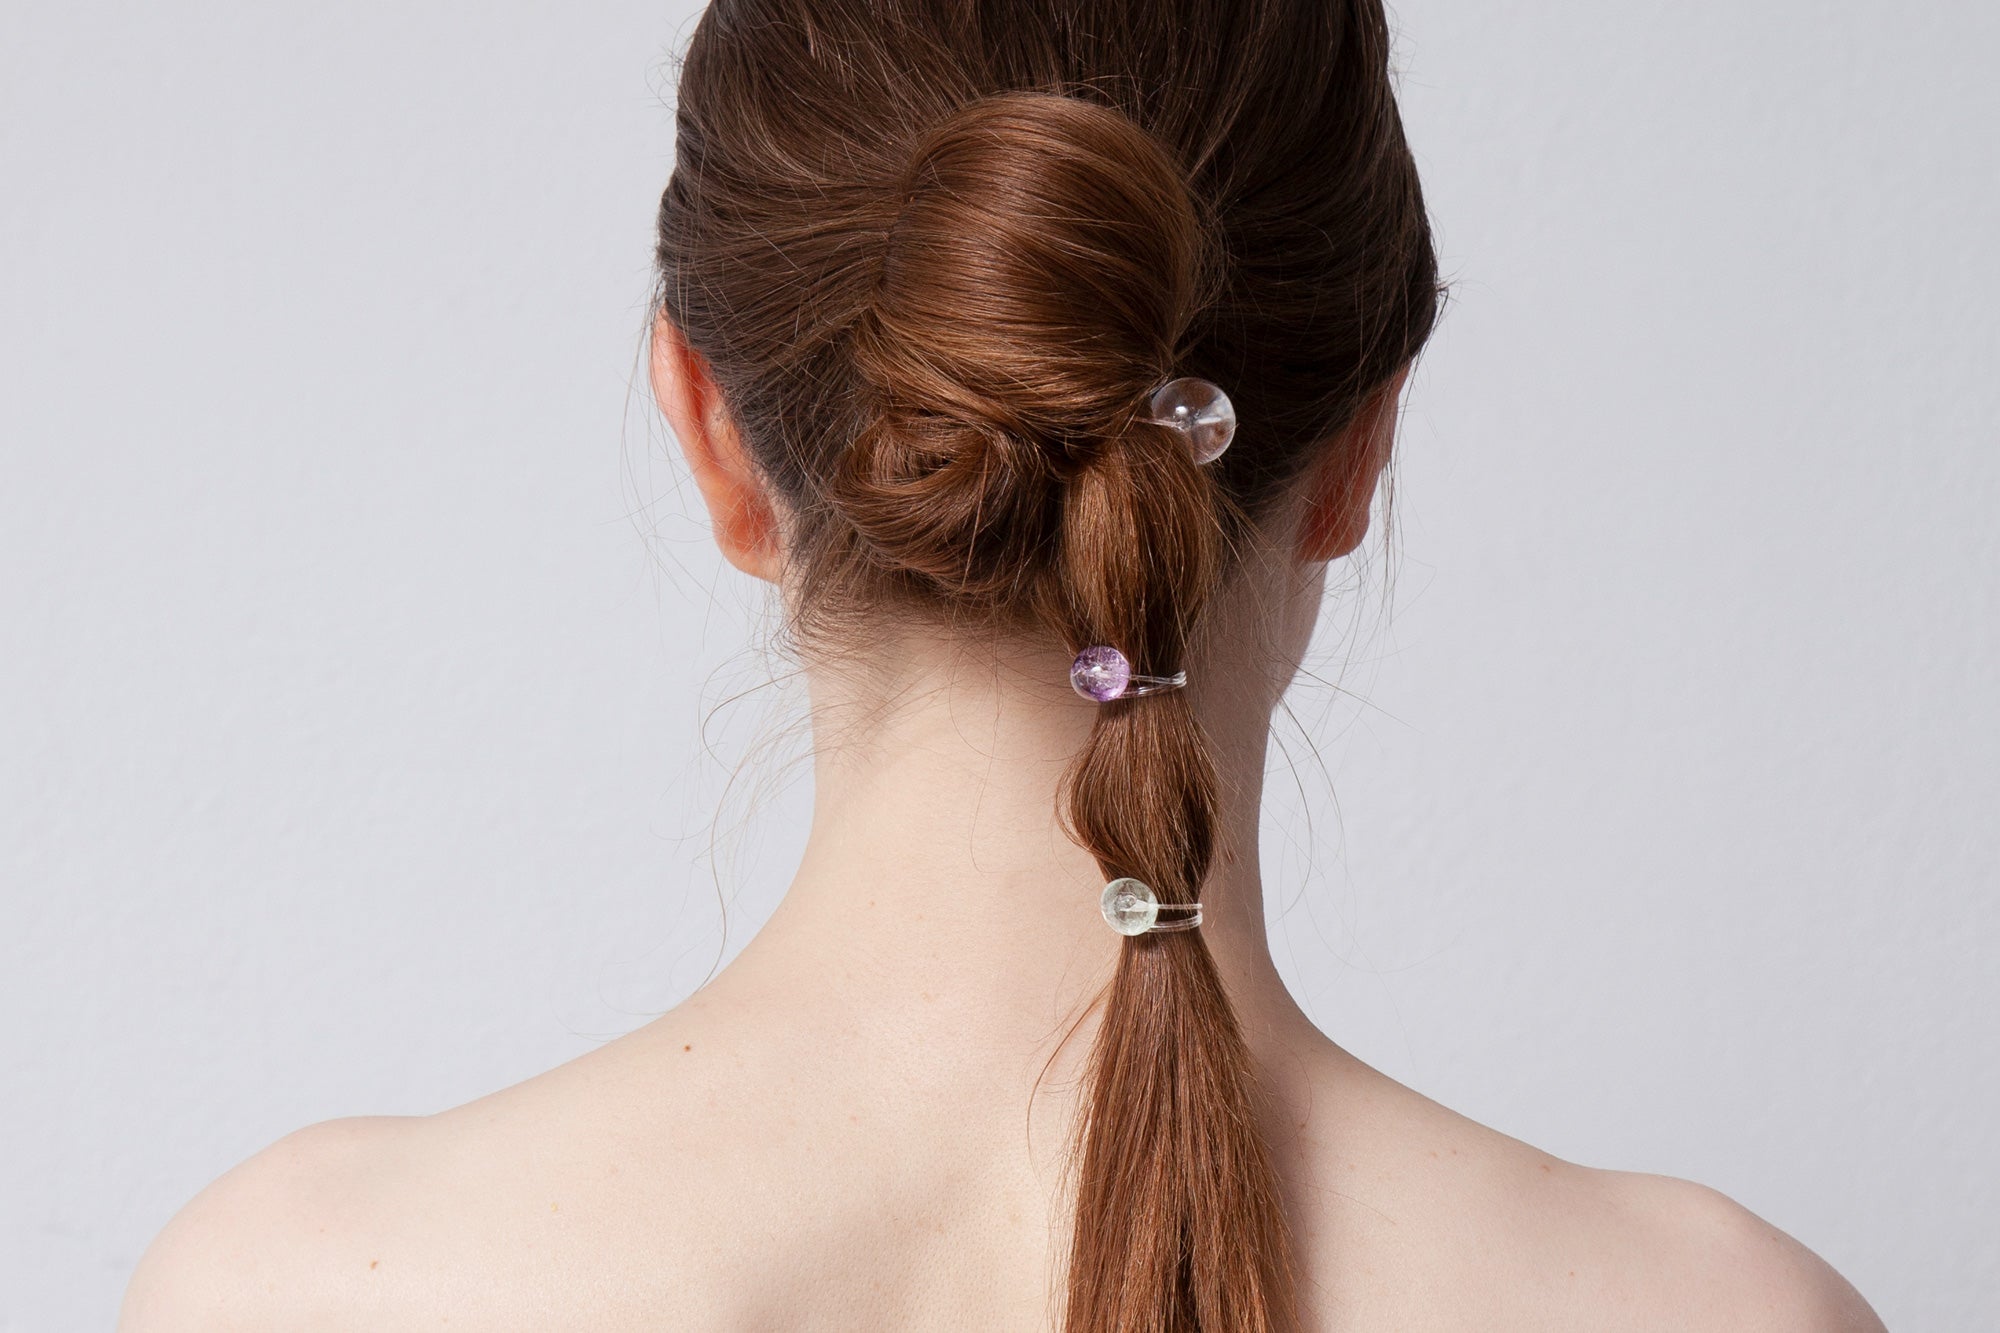 Contemporary hair jewelry and accessories handmade in Berlin – CLINQ